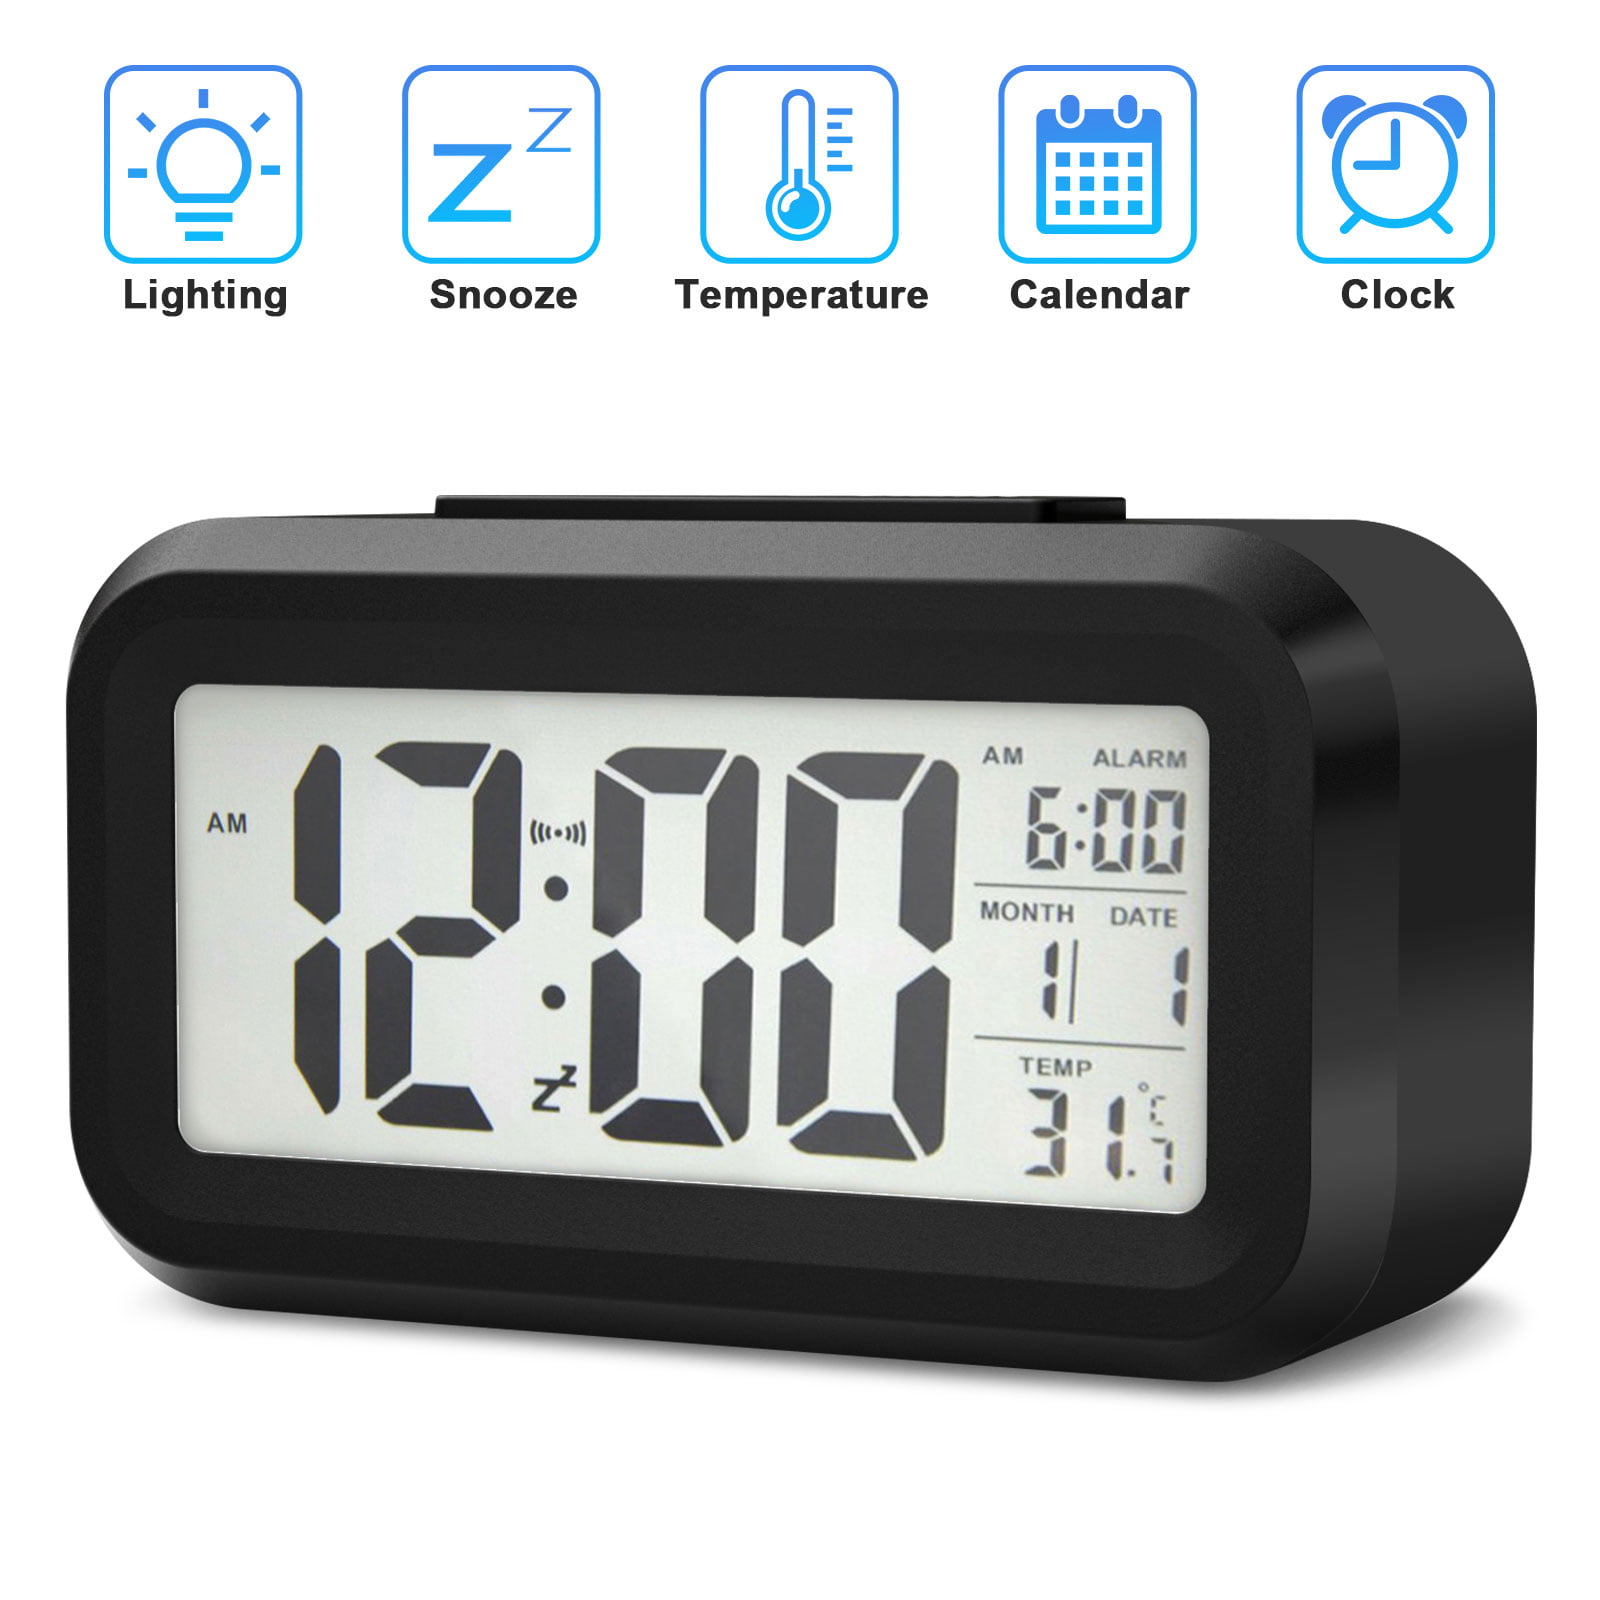 Digital LCD Snooze Electronic Alarm Clock Backlight Time Calendar Thermometer Temperature Upgrade Version Battery Operated Alarm Clock FONCBIEN Digital Snooze LED Alarm Clock -